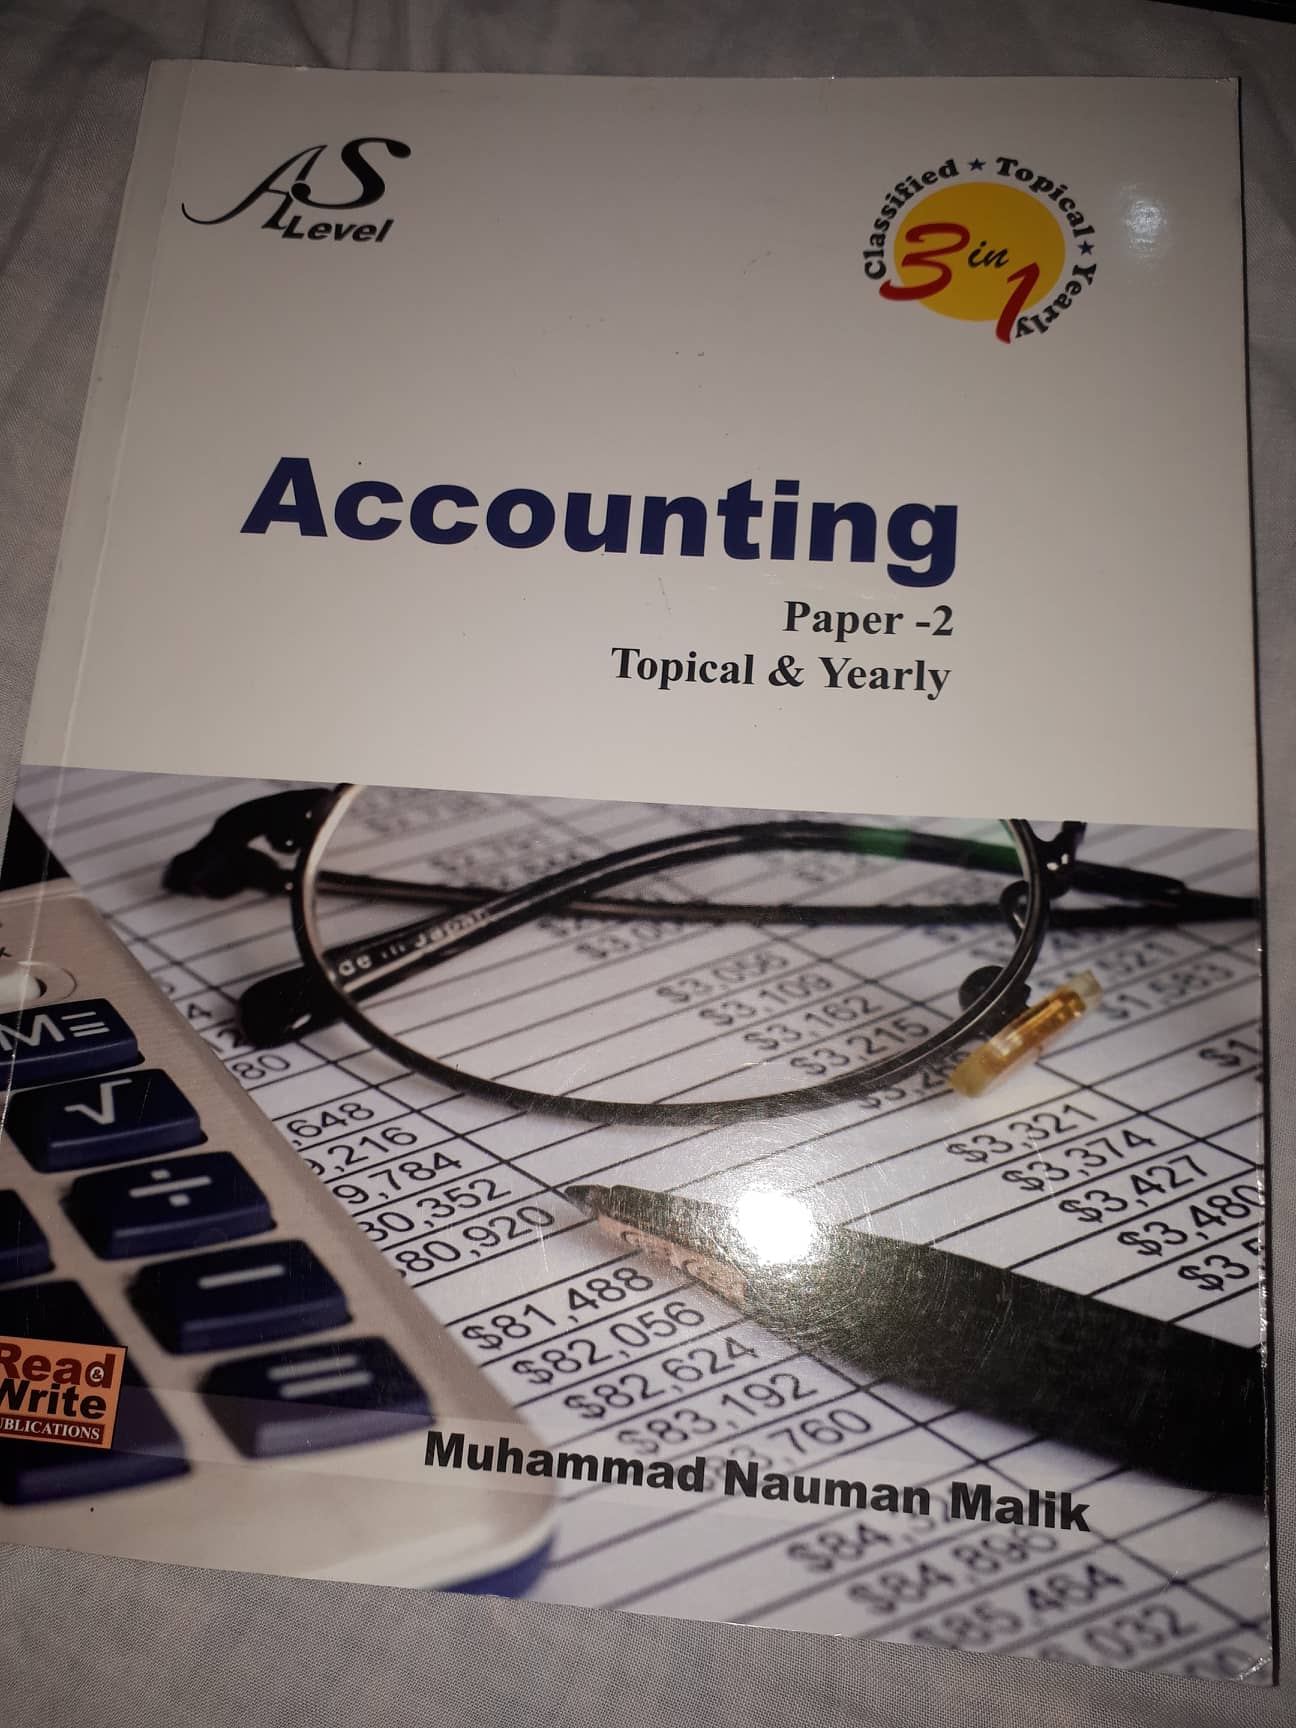 Accounting P1 P2 pastpapers topical and yearly
